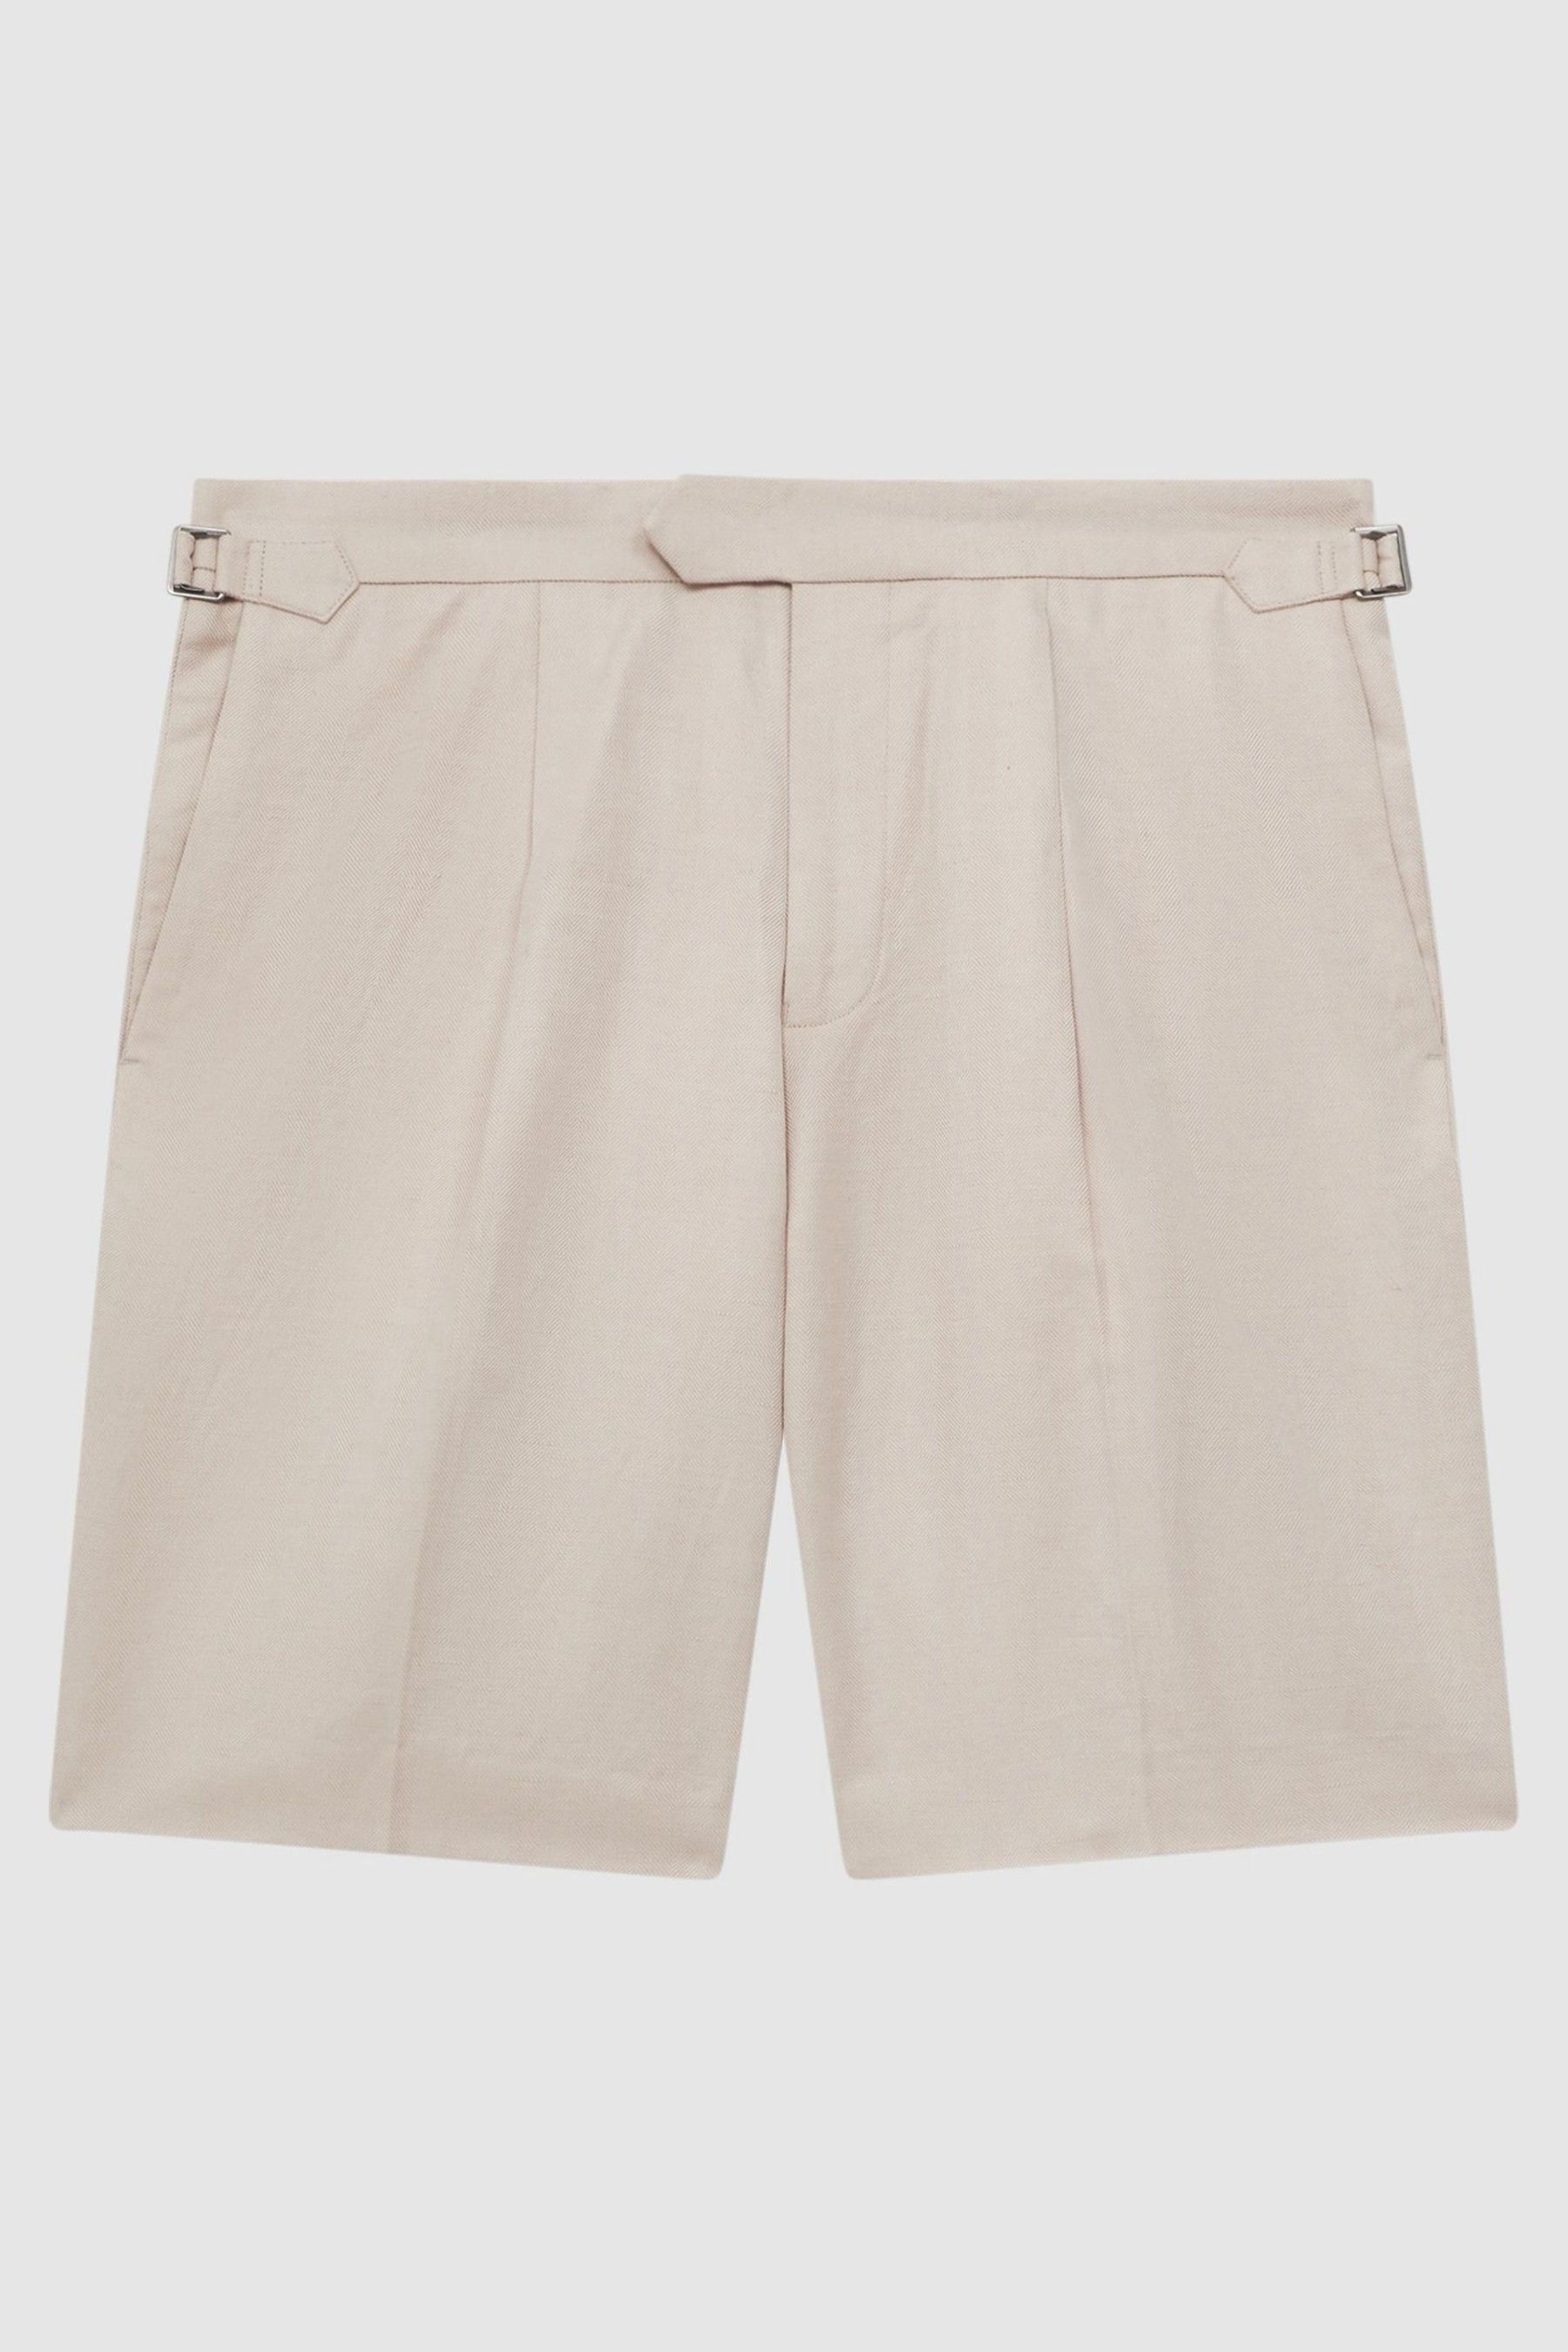 Reiss Stone Path Cotton-Linen Blend Chino Shorts - Image 2 of 6